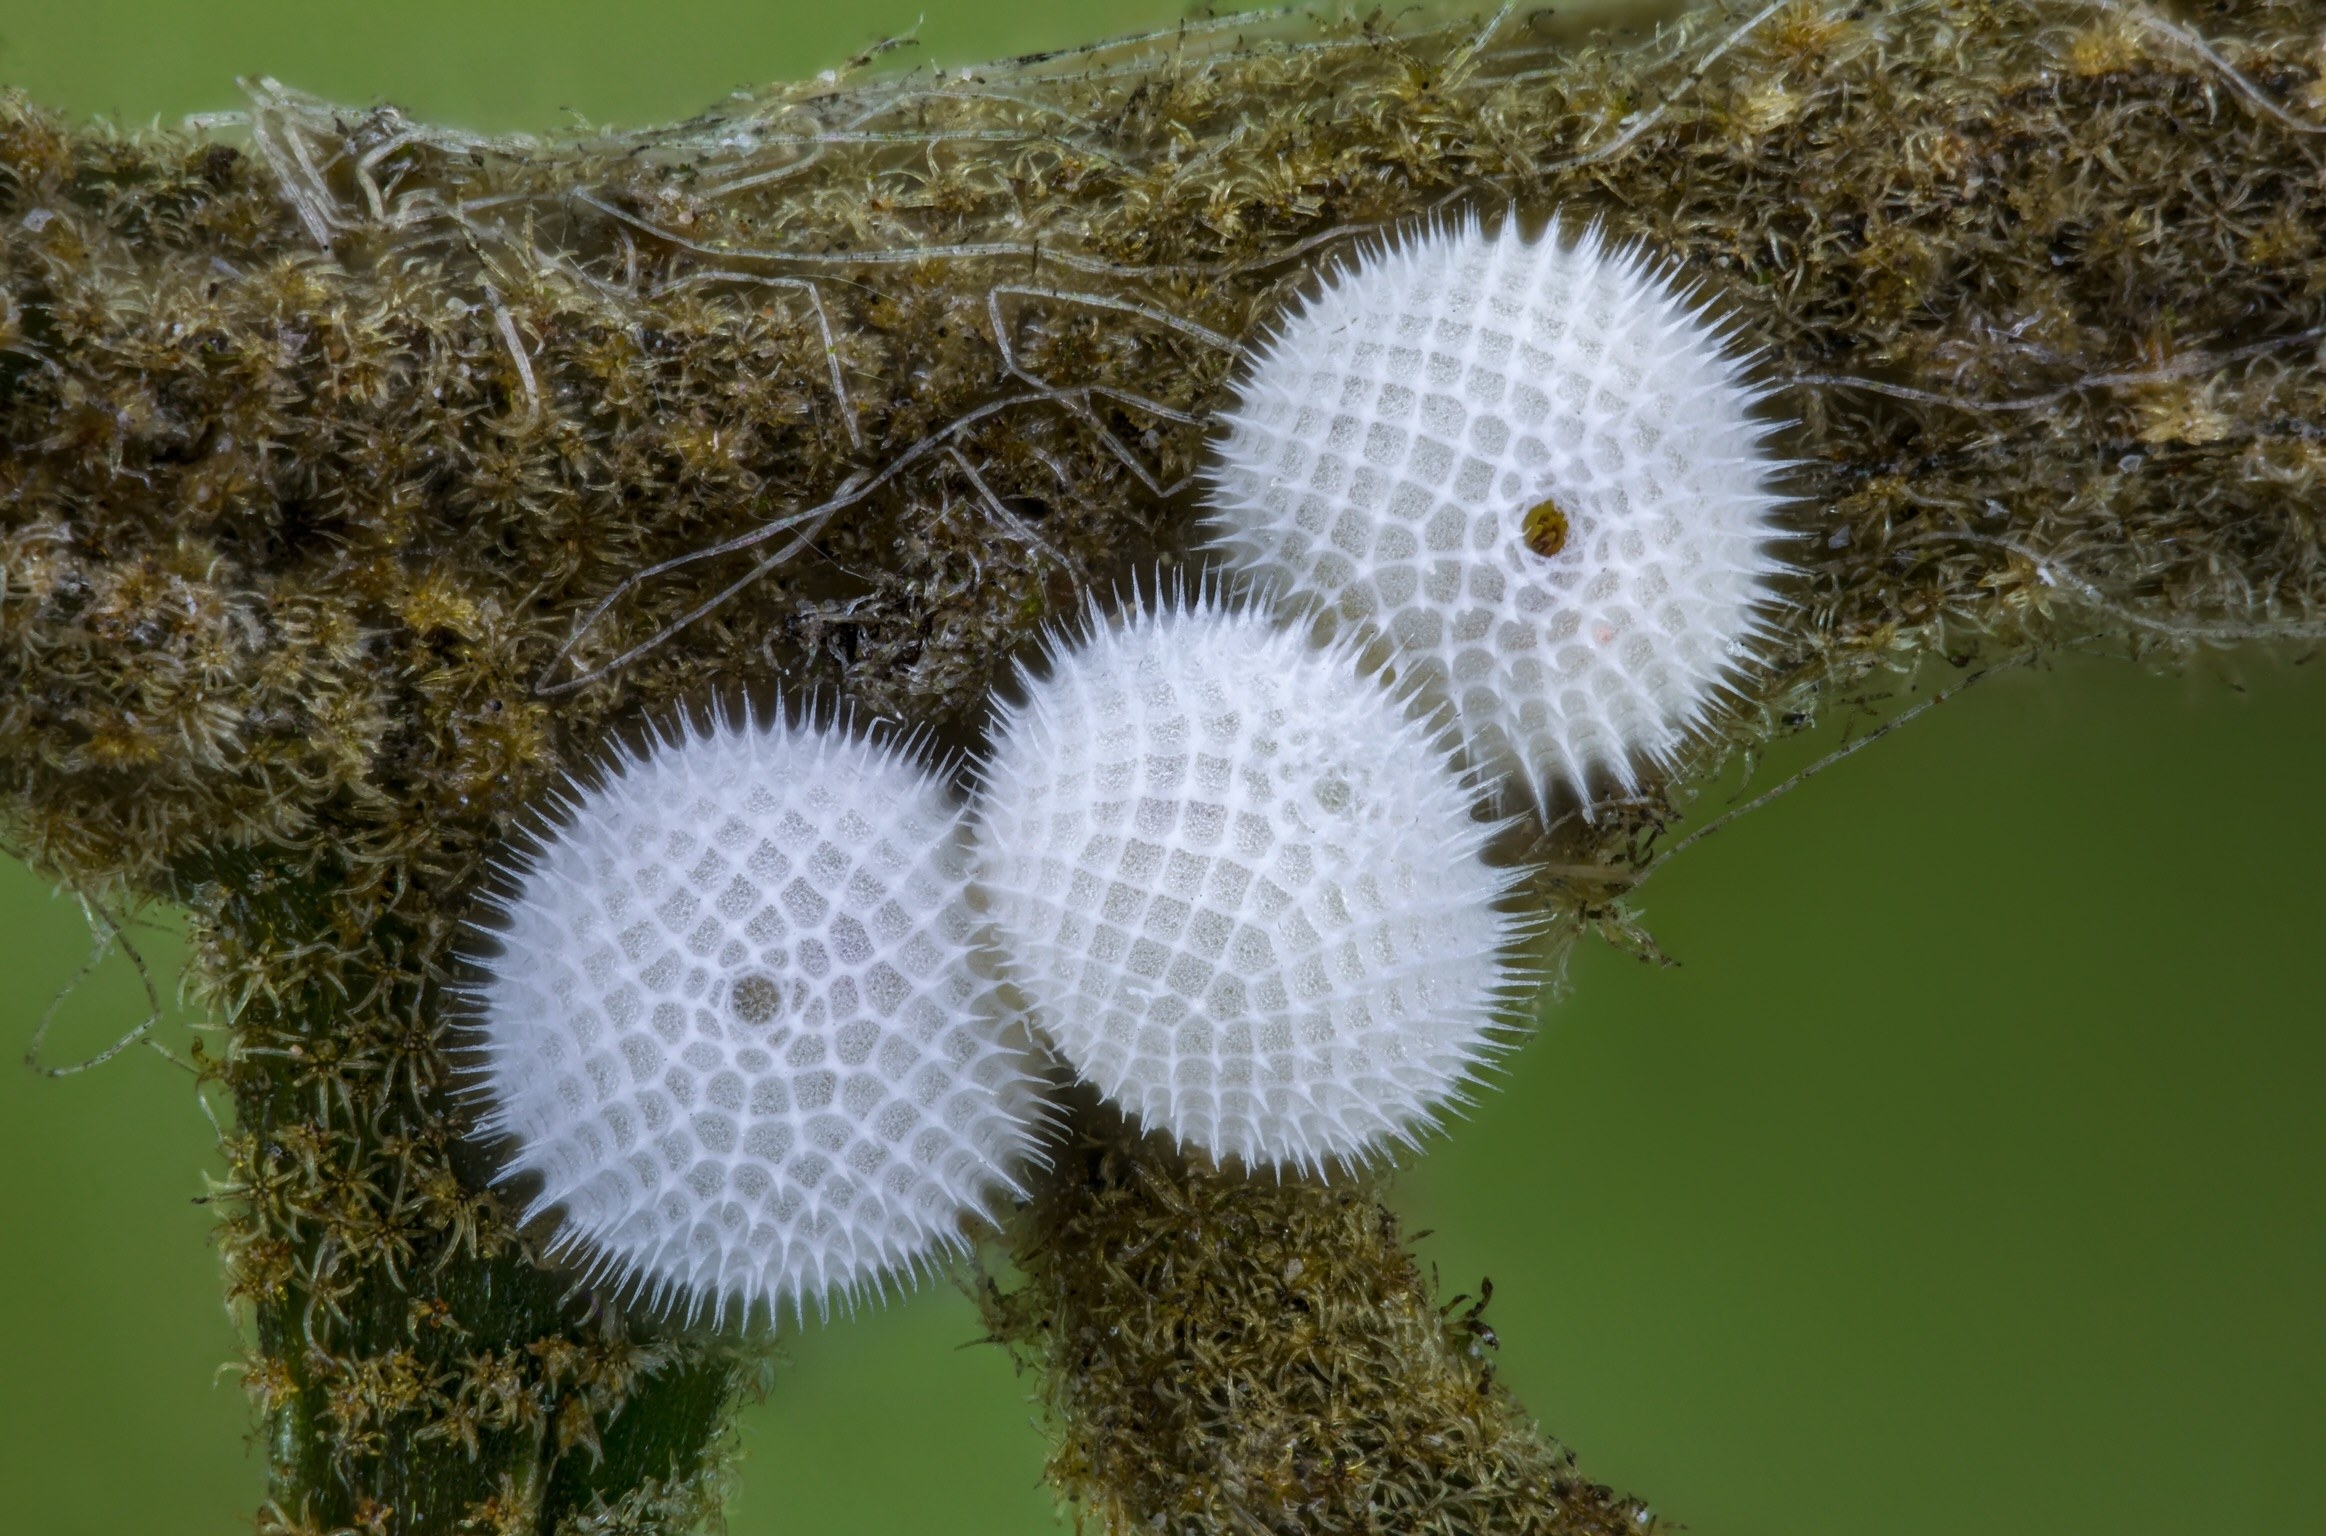 small, spiky round structures are butterfly eggs on a  stem,  magnified many times